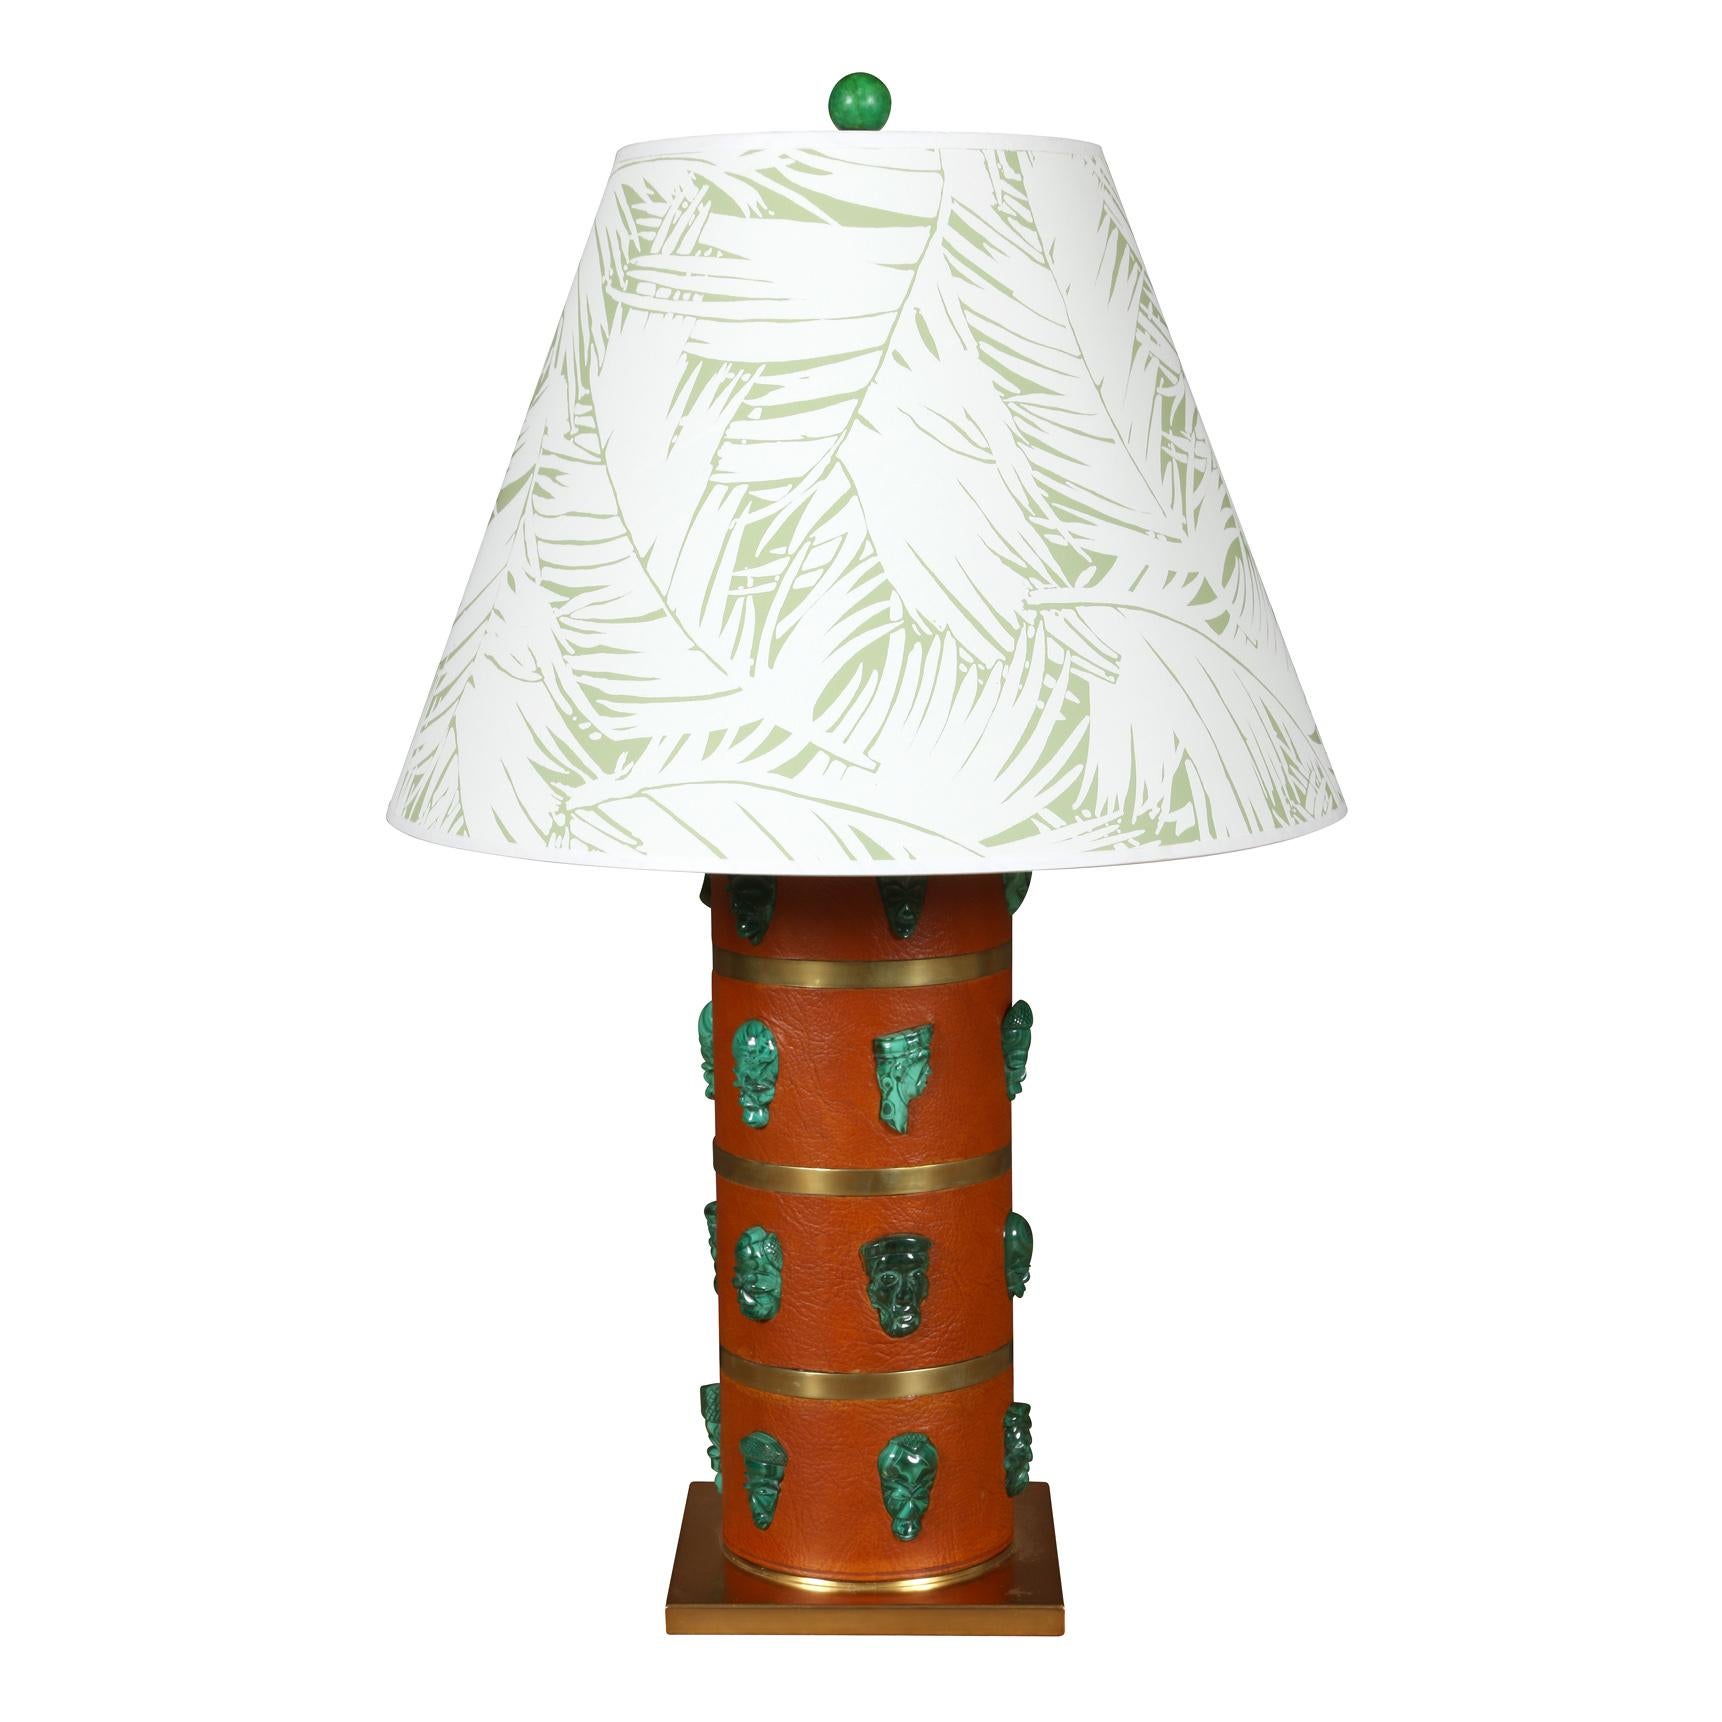 A pair of leather cylindrical deep orange lamps on a square brass base with faux malachite details. Lampshades sold separately.